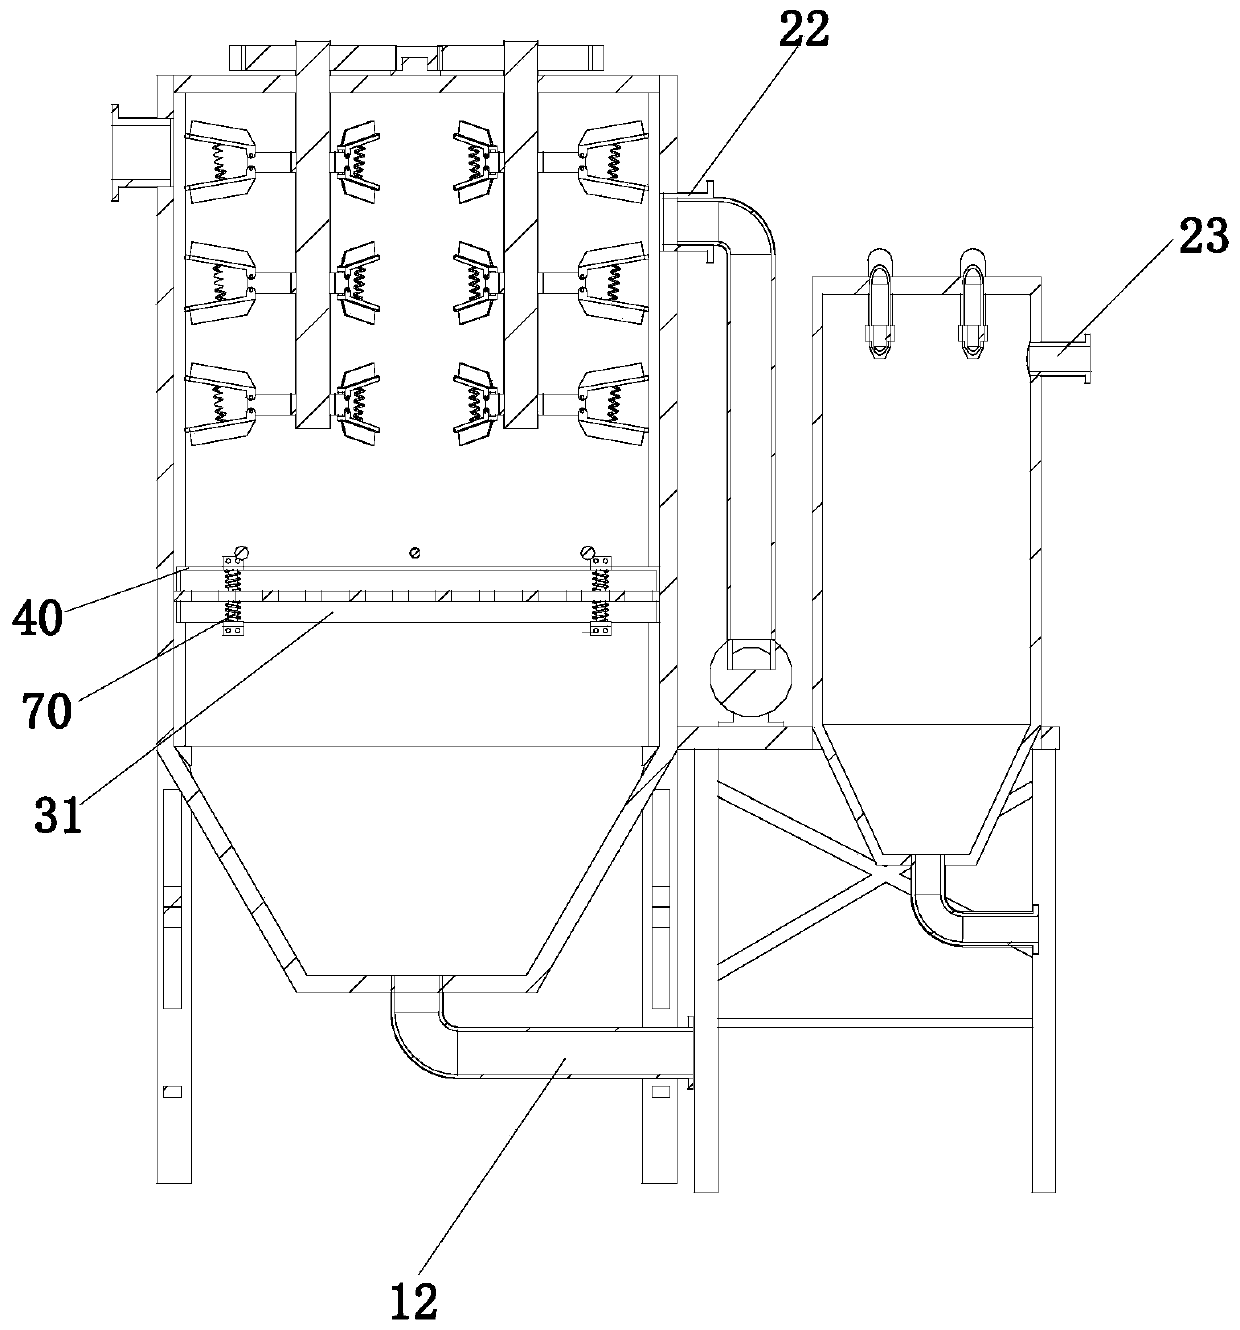 Extraction separation device for biopharmaceutical